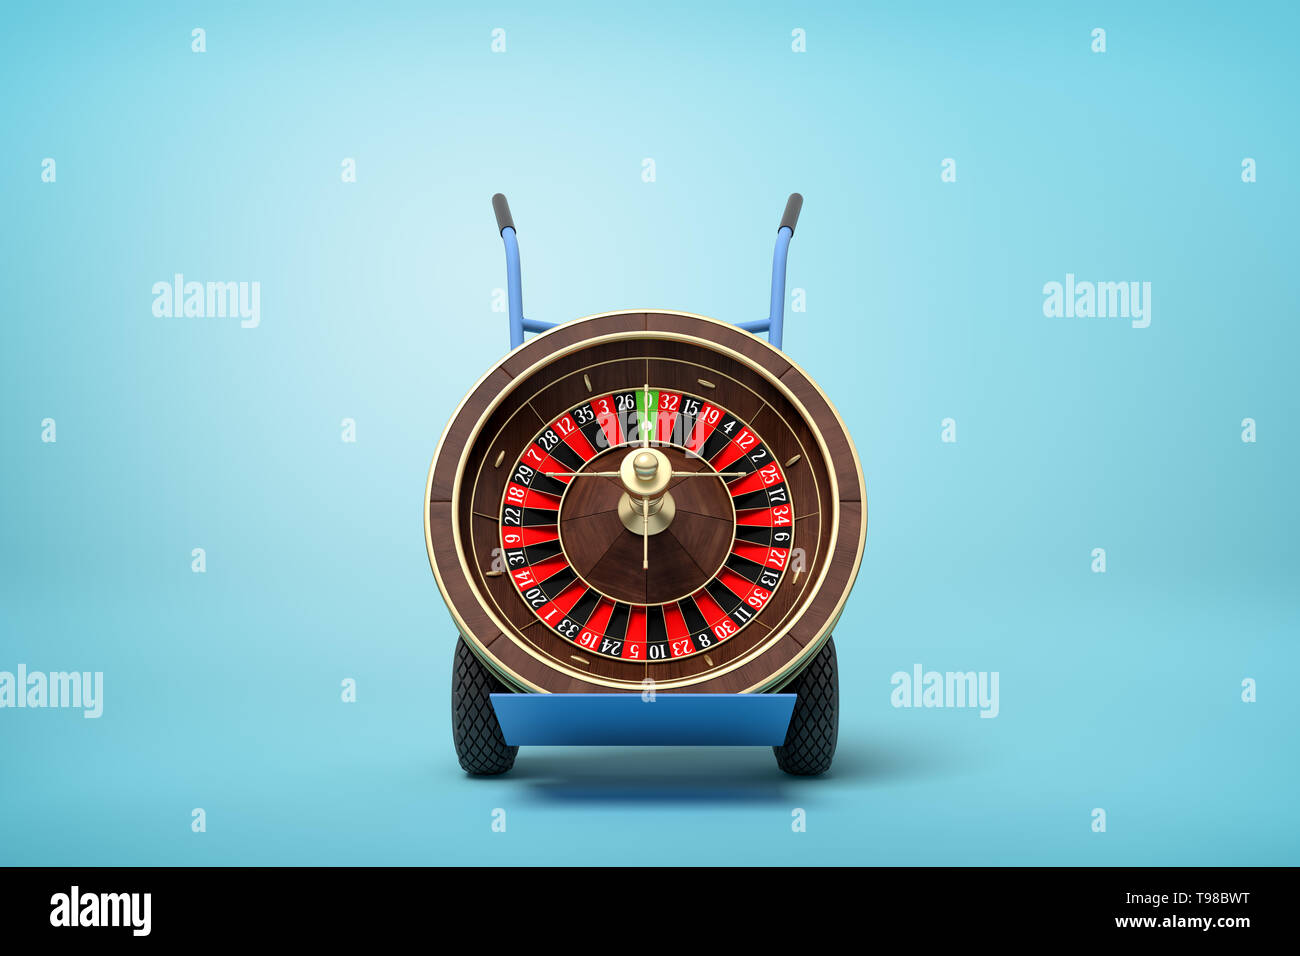 3d rendering of navy blue hand truck standing upright with casino roulette wheel on it on light-blue background. Stock Photo